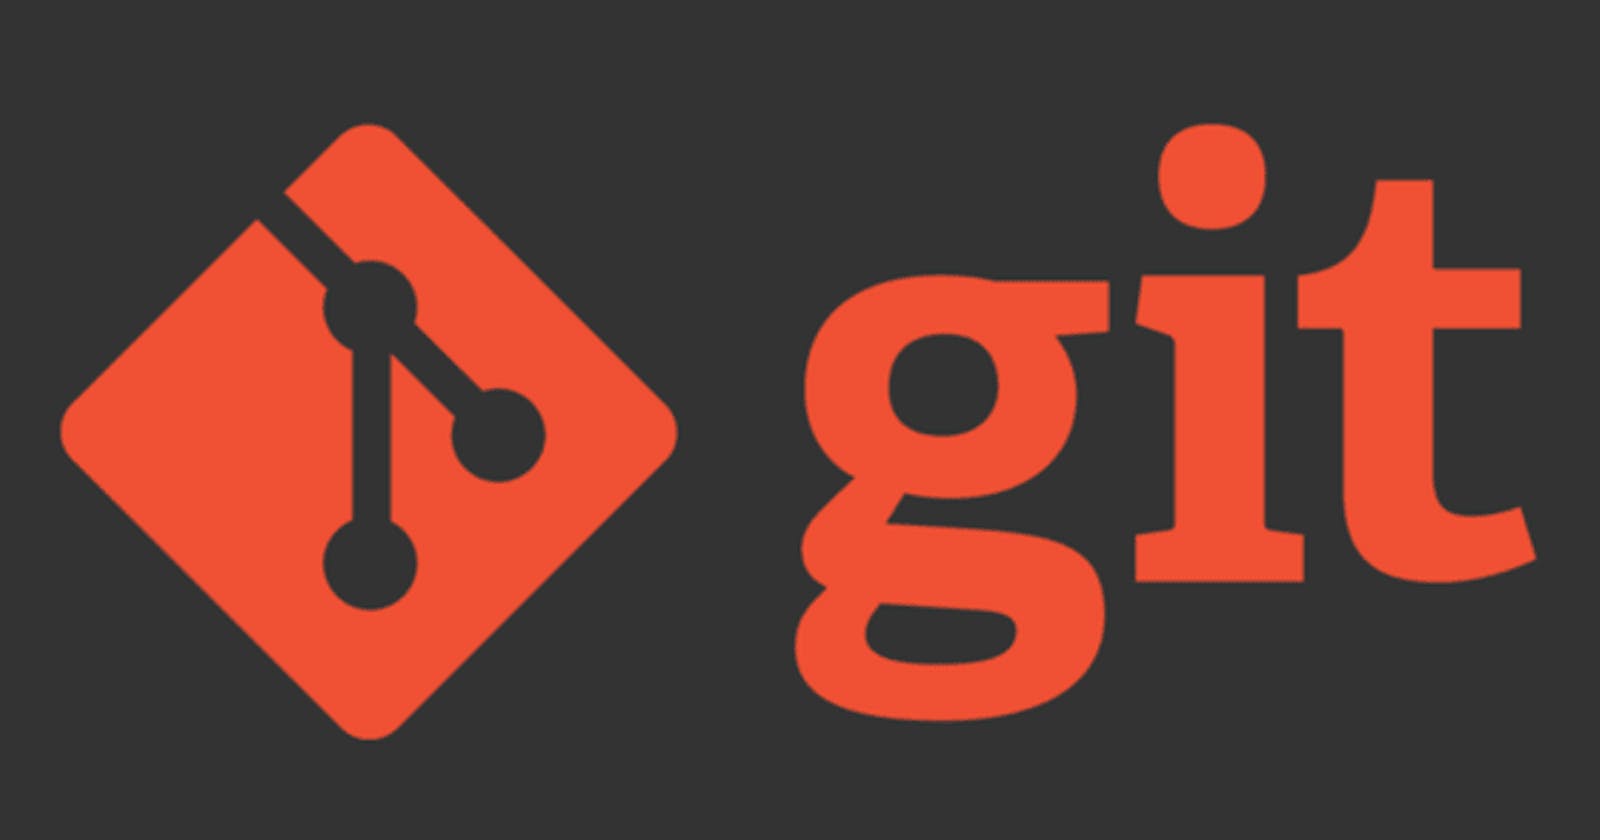 Most important git commands you should always know as a develop